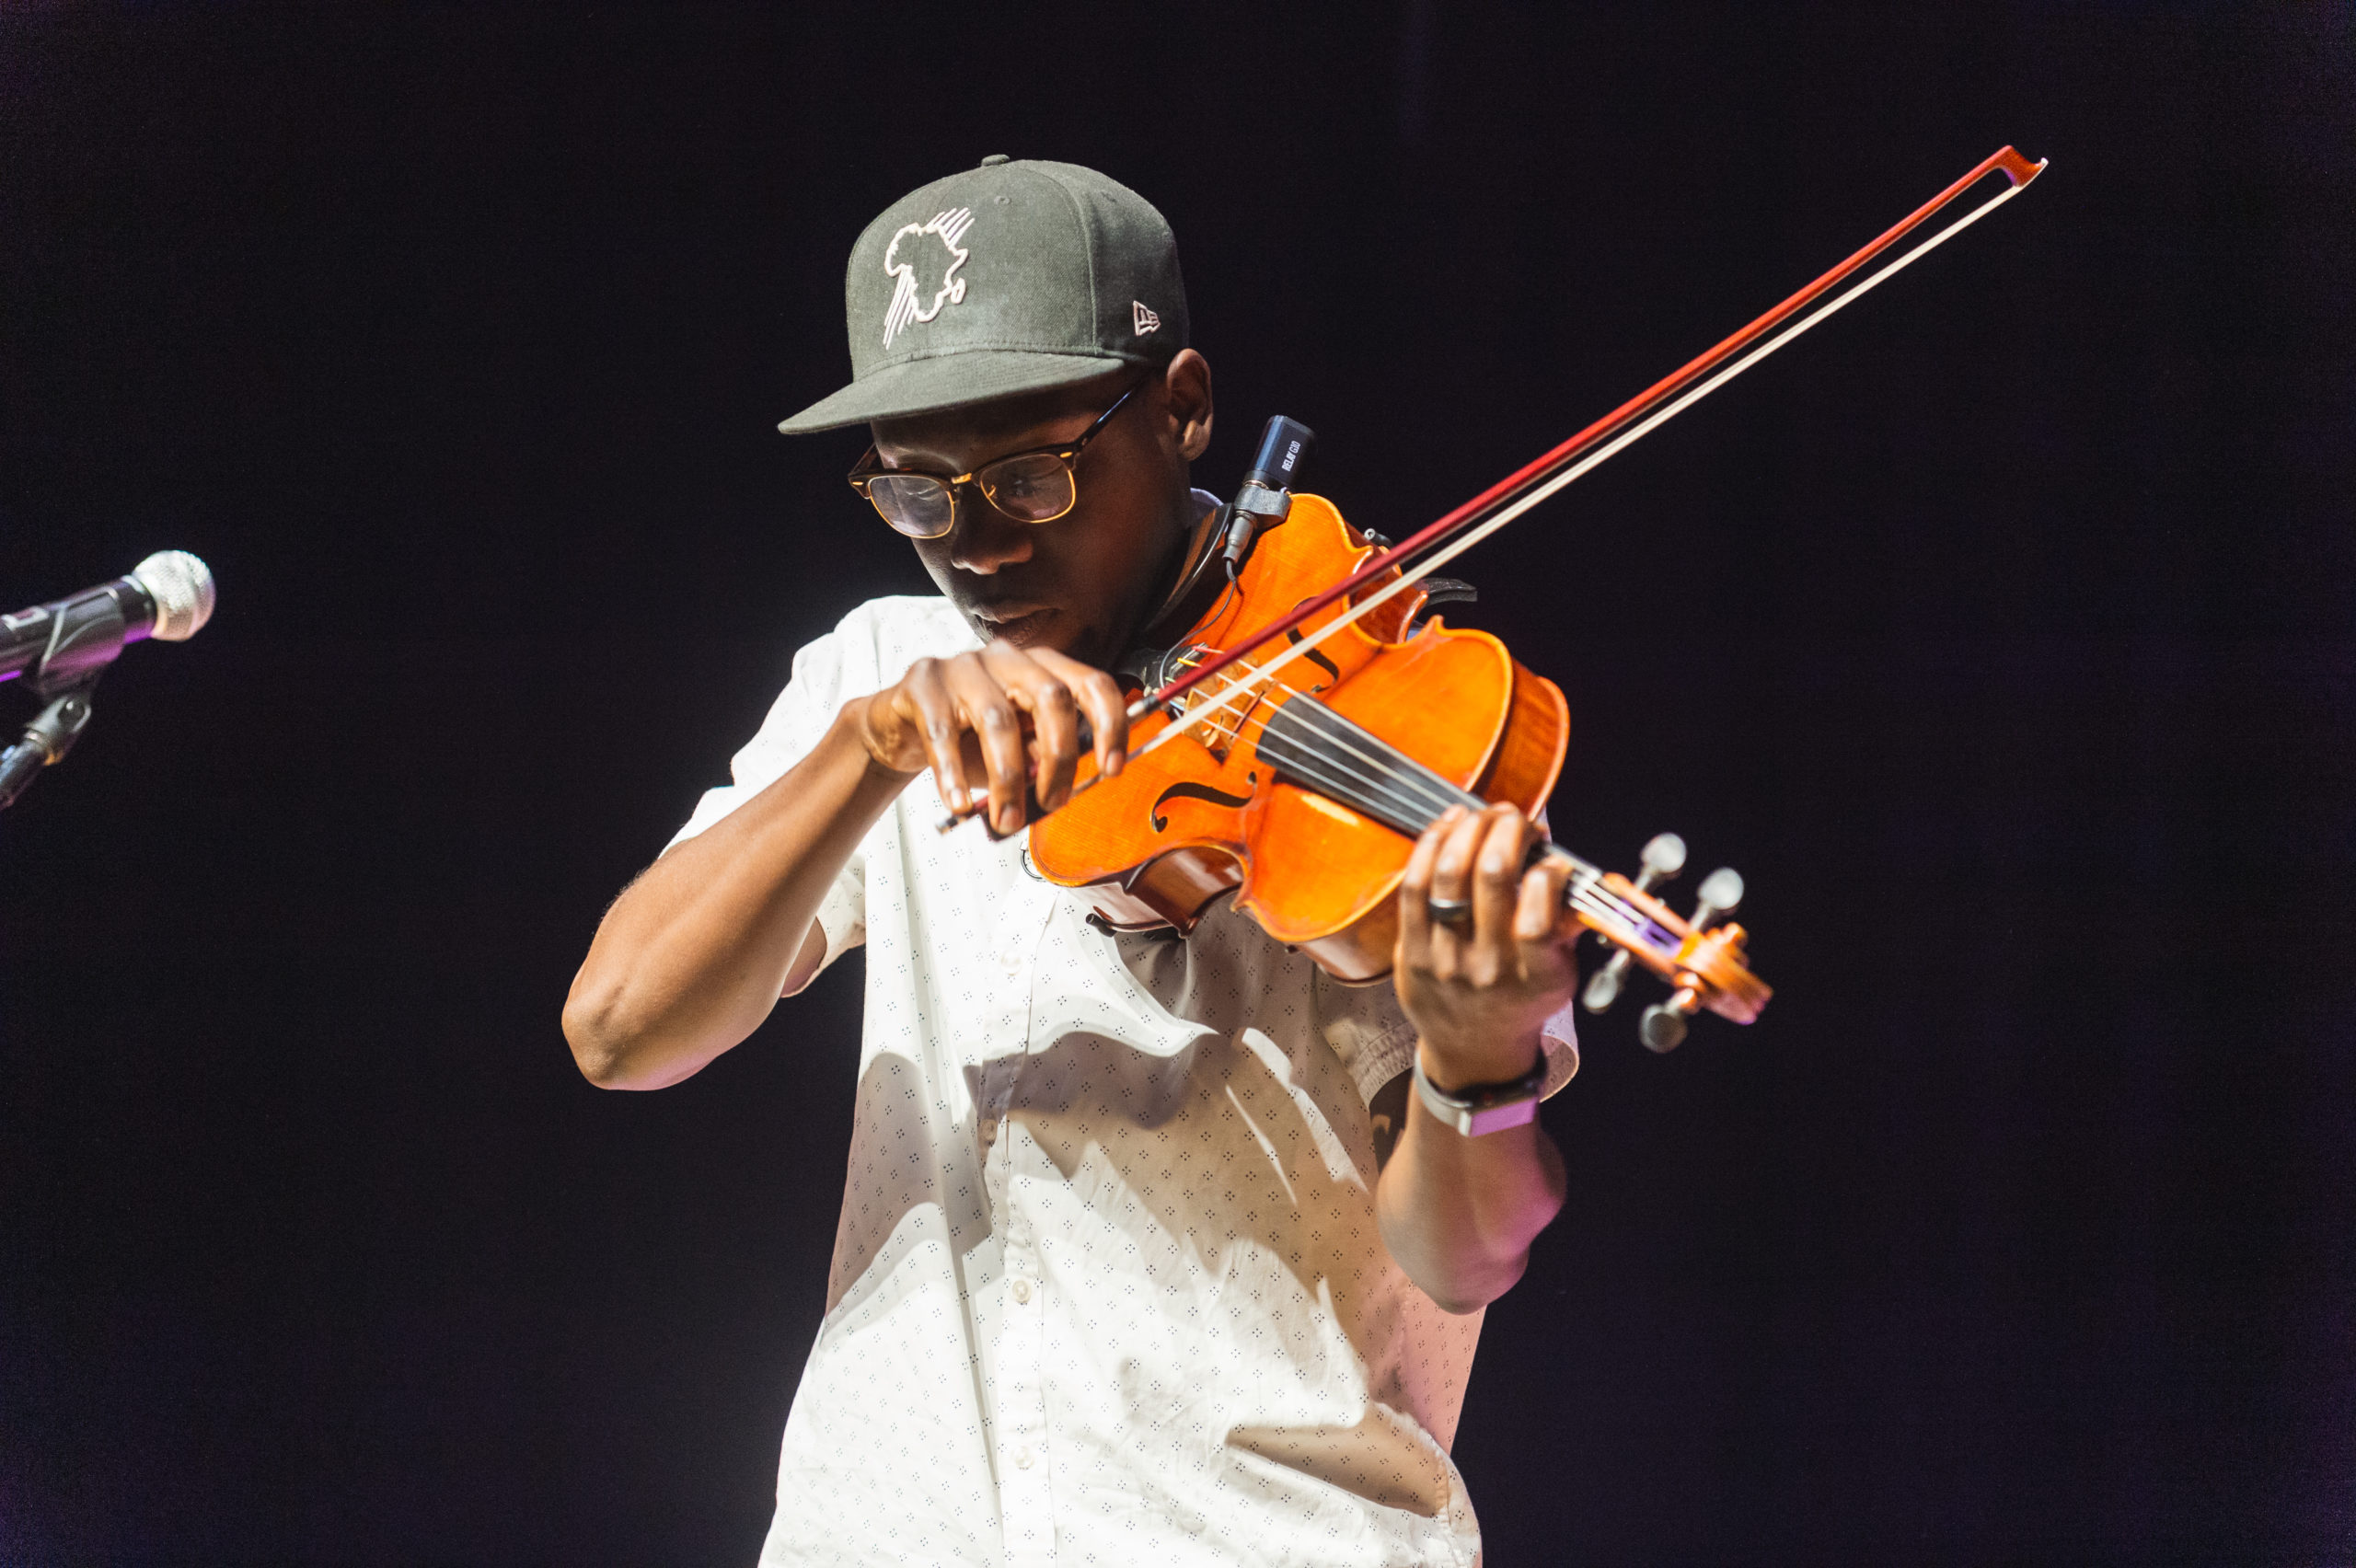 The Kennedy Center African American man playing a violin